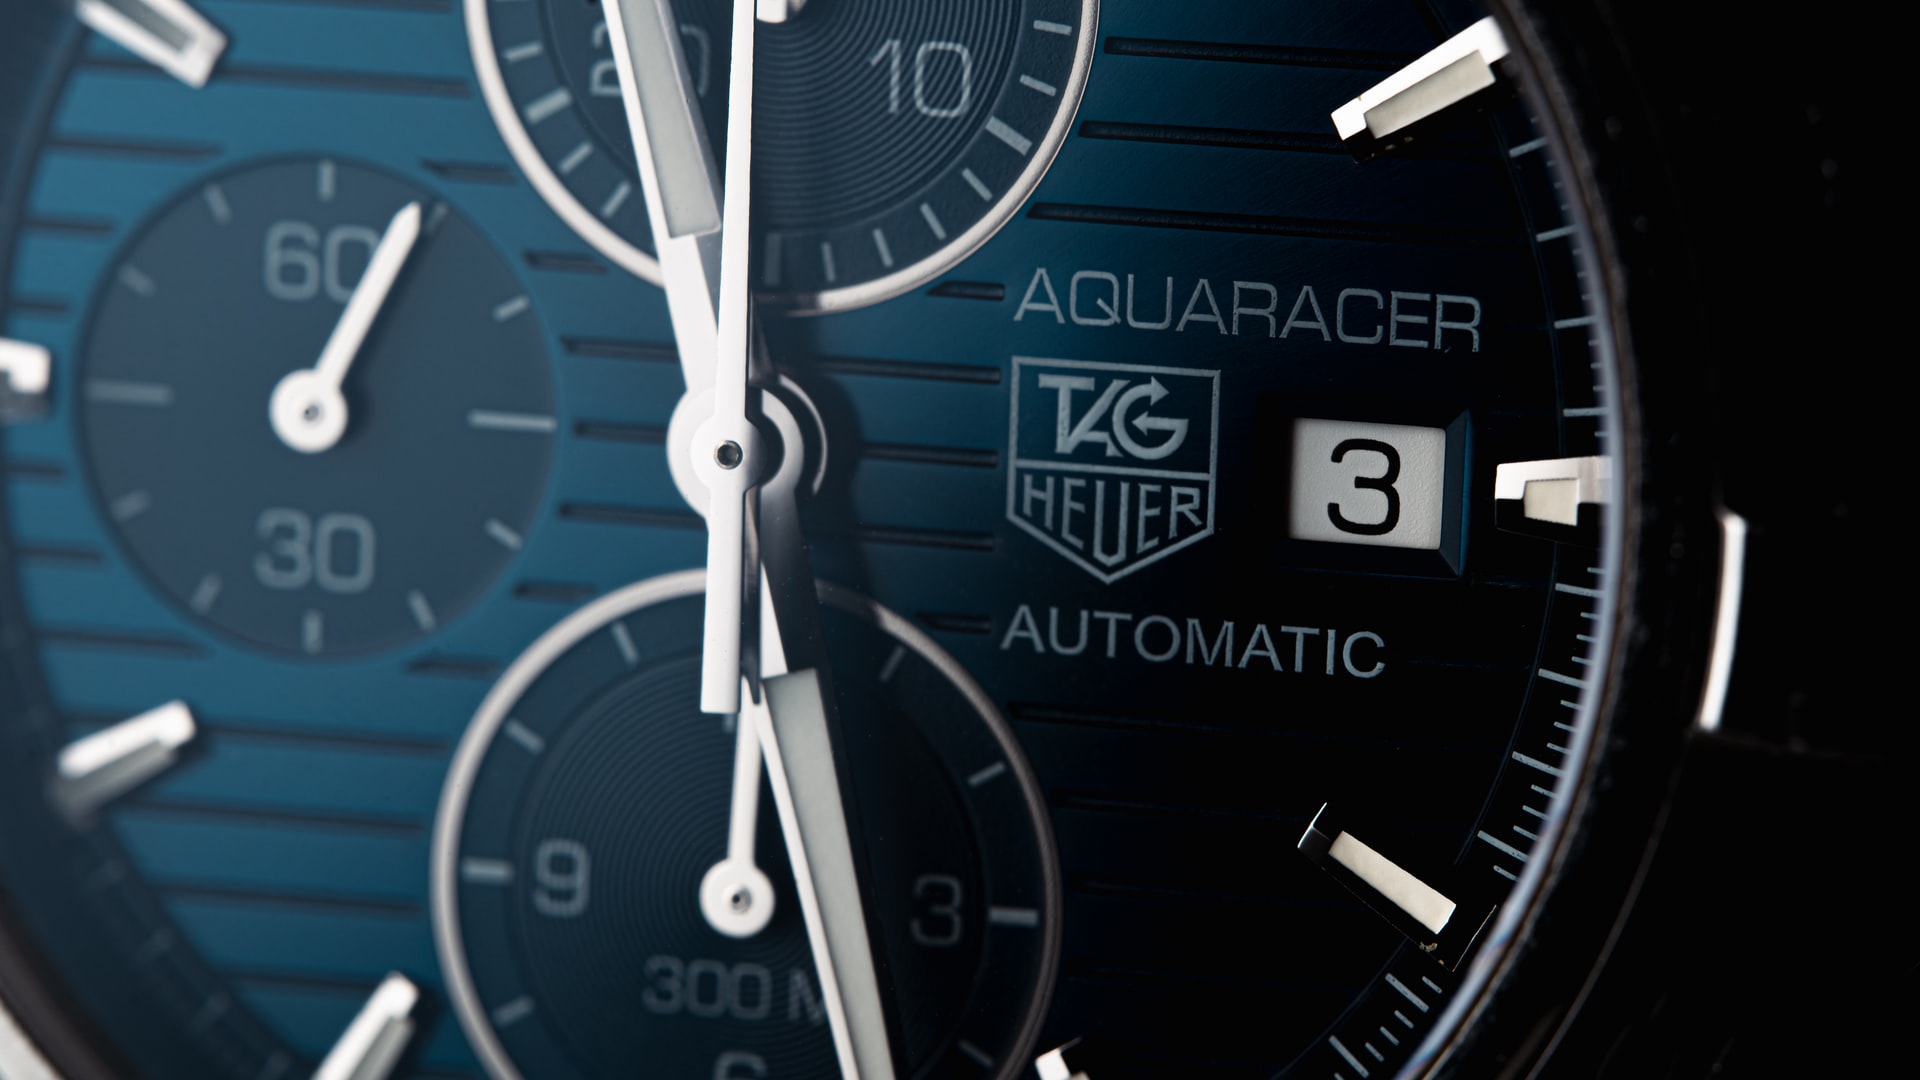 Tag Heuer Launched A New Feature, NFT Display On Watches